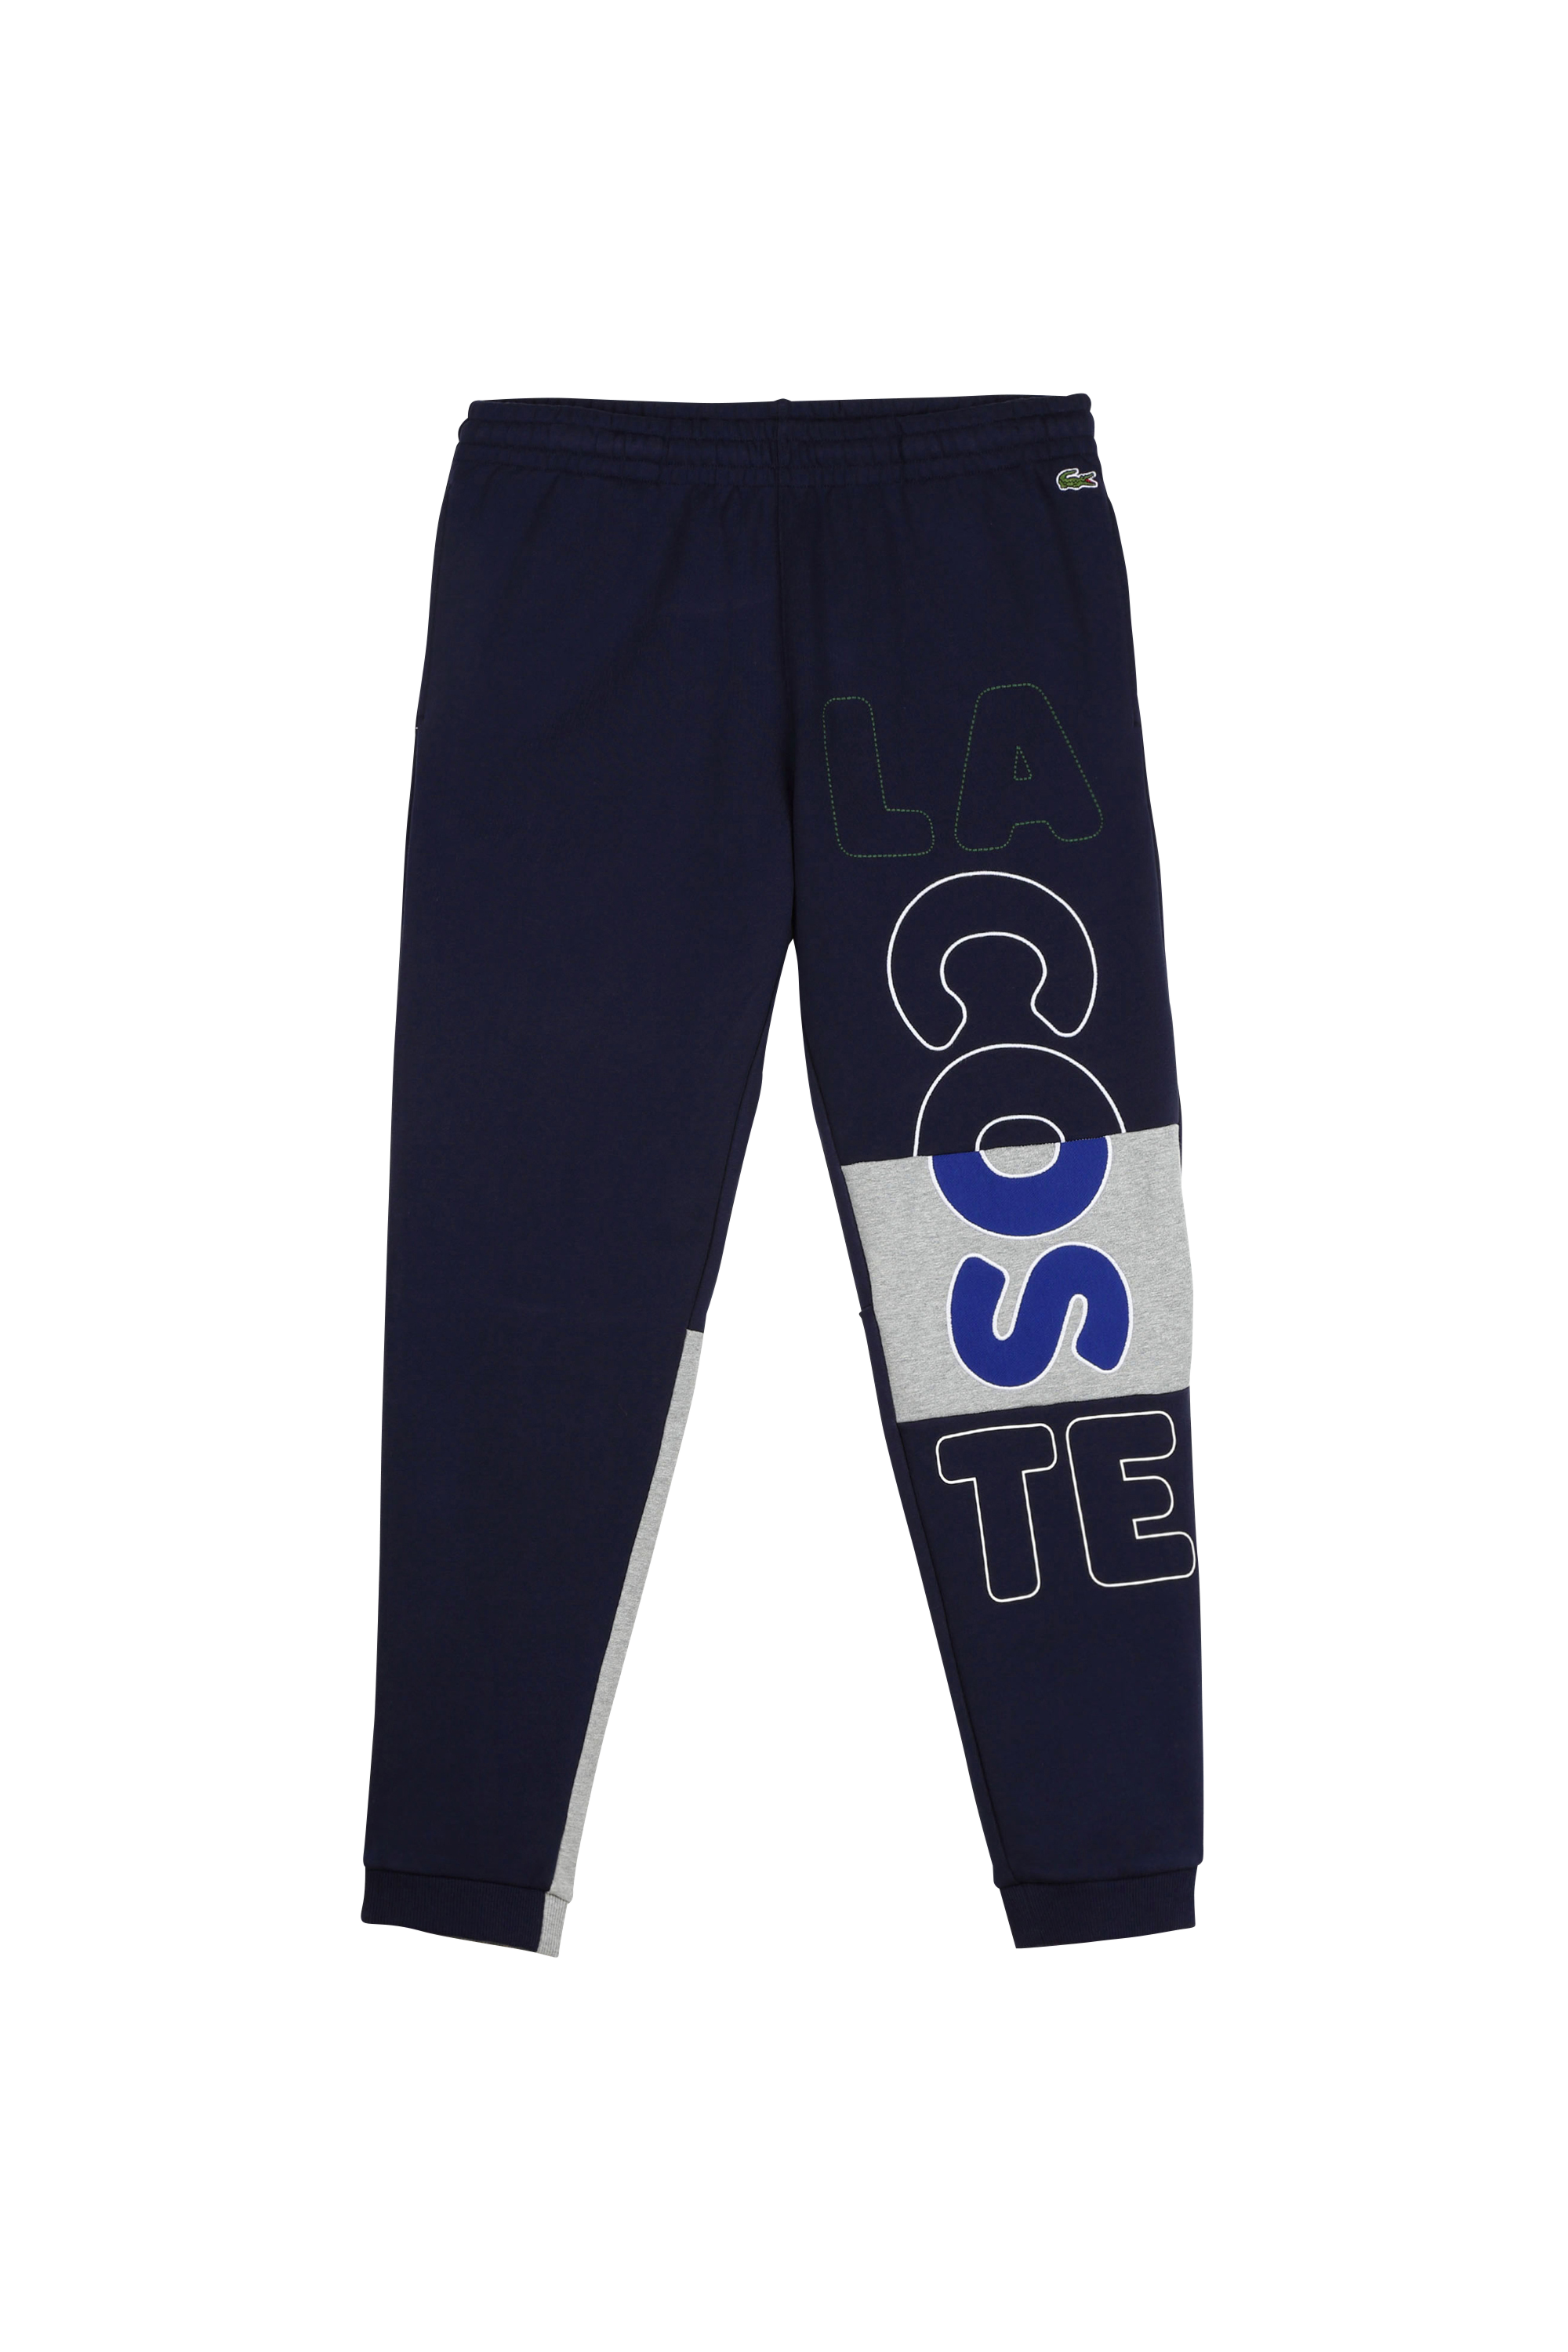 Lacoste - Jogging - Taille 5